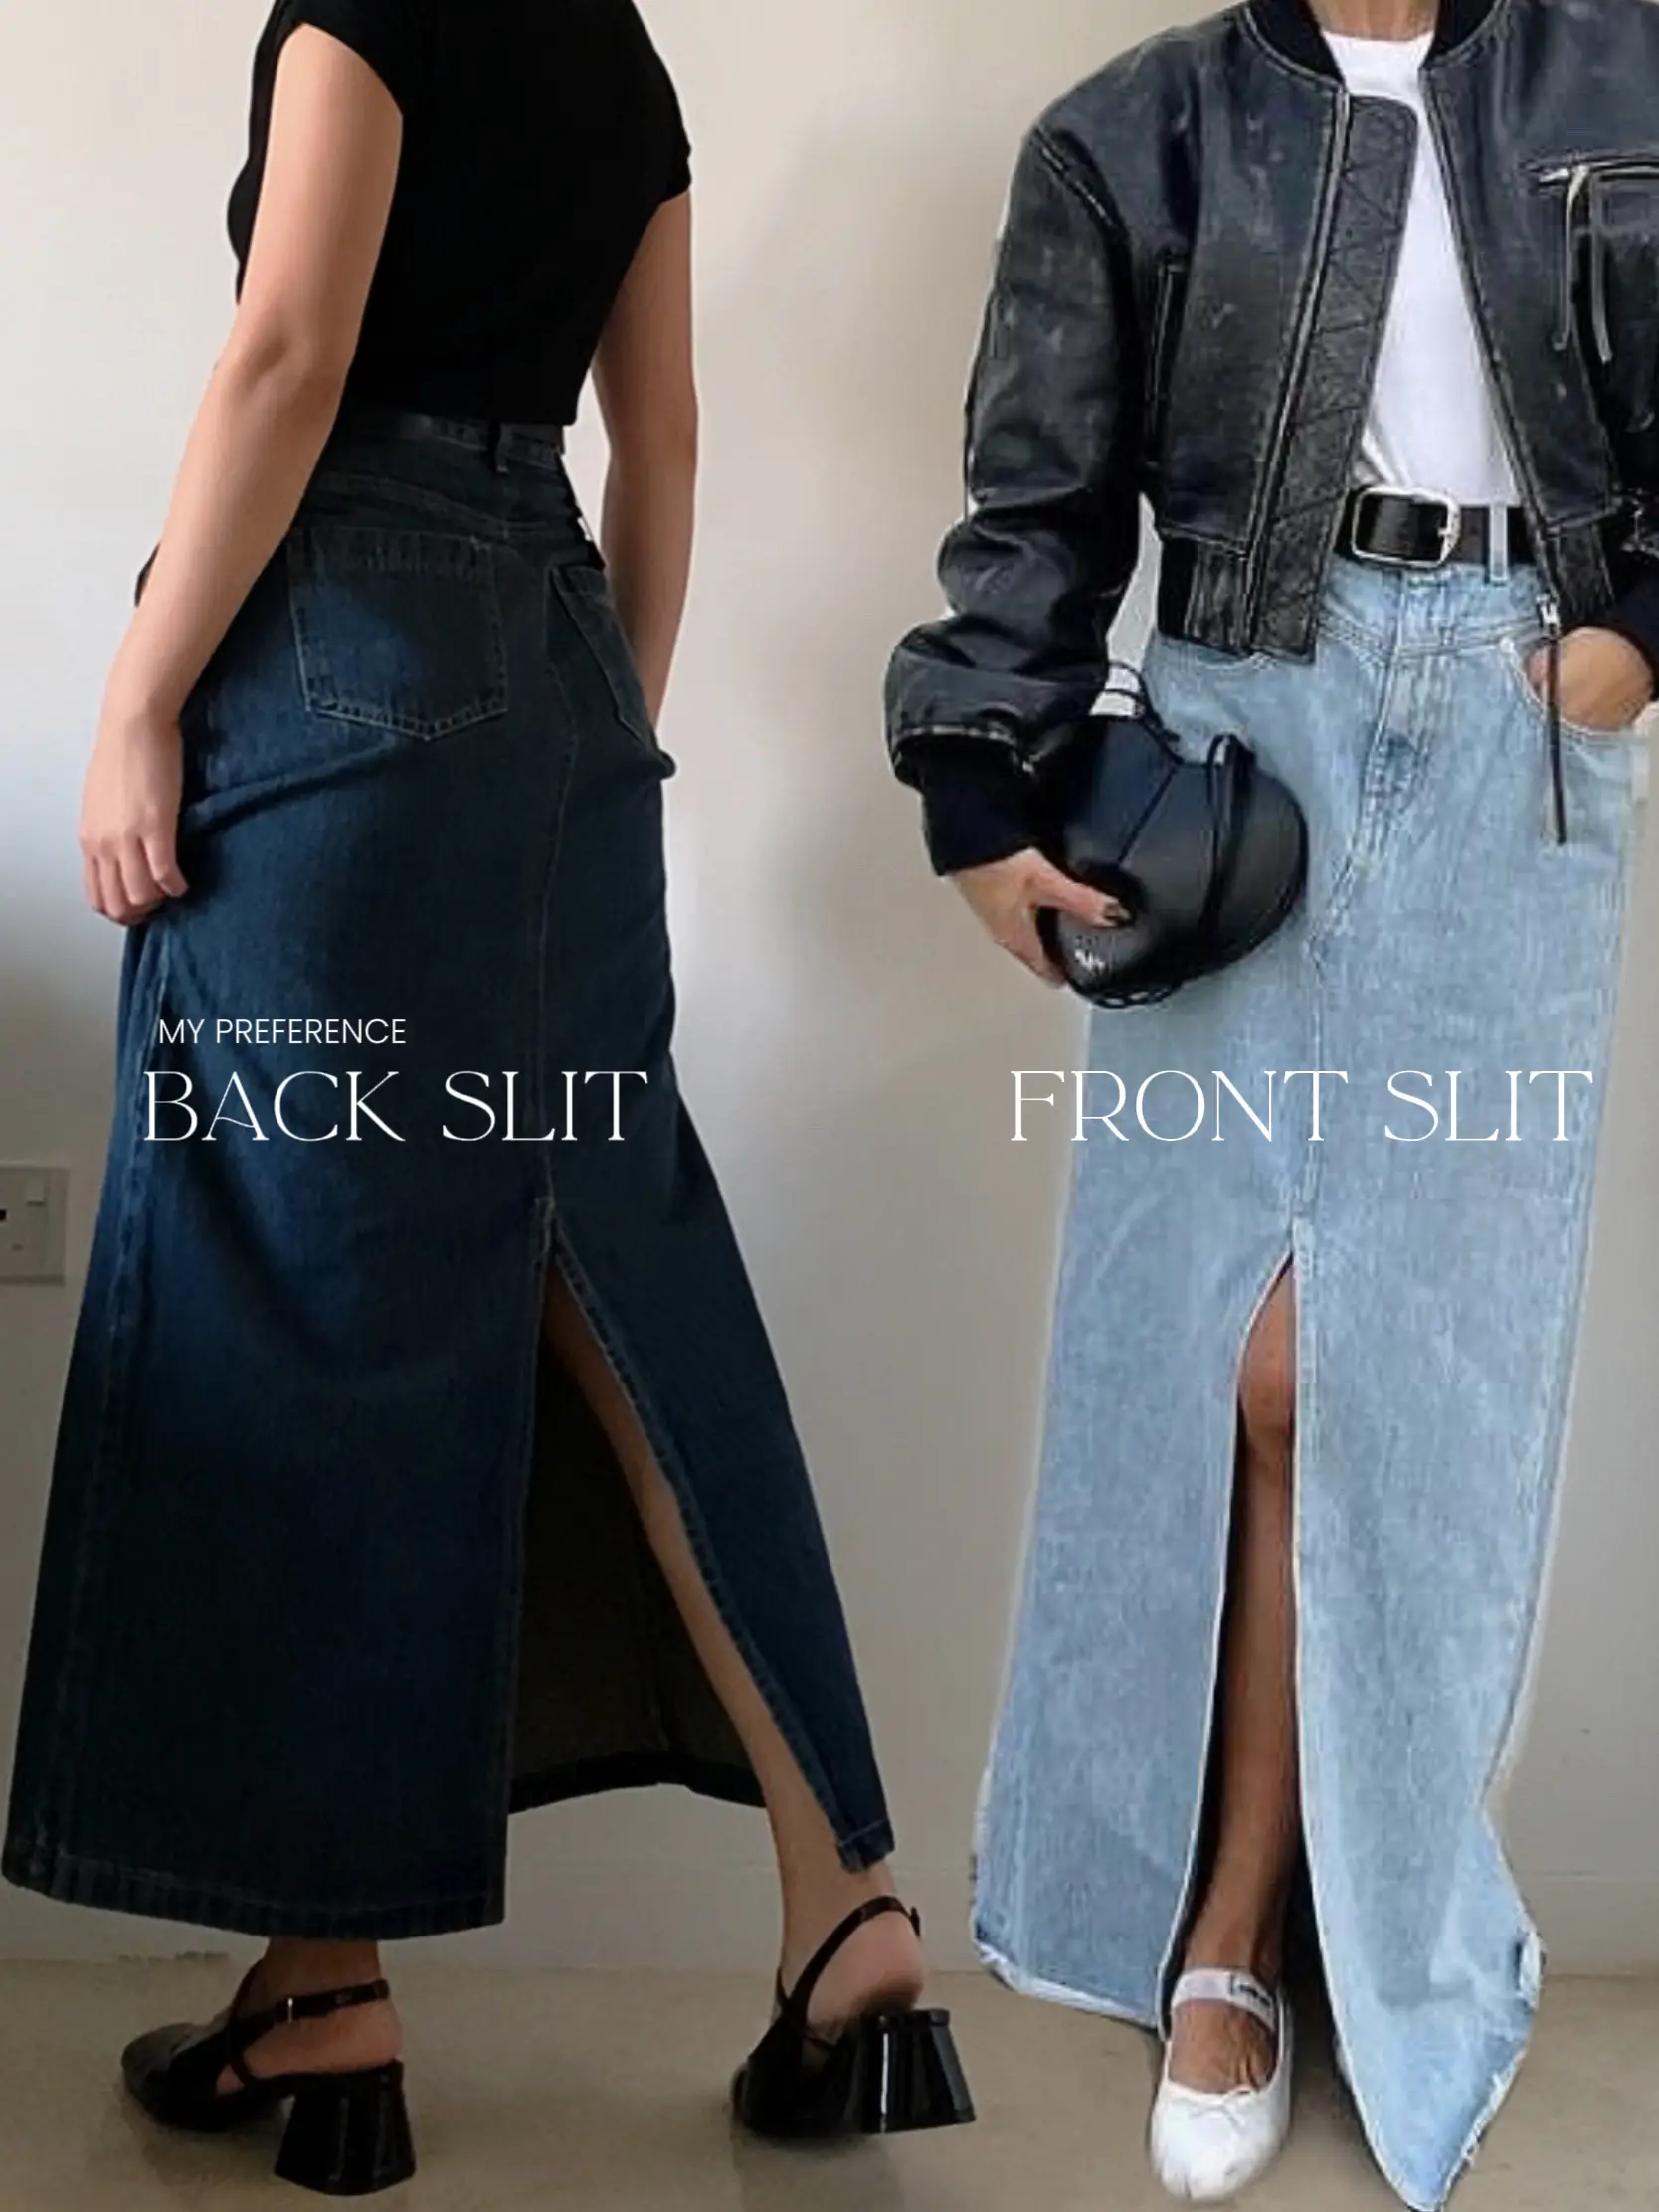 Stylish & effortless looks with Maxi denim skirt 🖤, Gallery posted by  Felicia✨